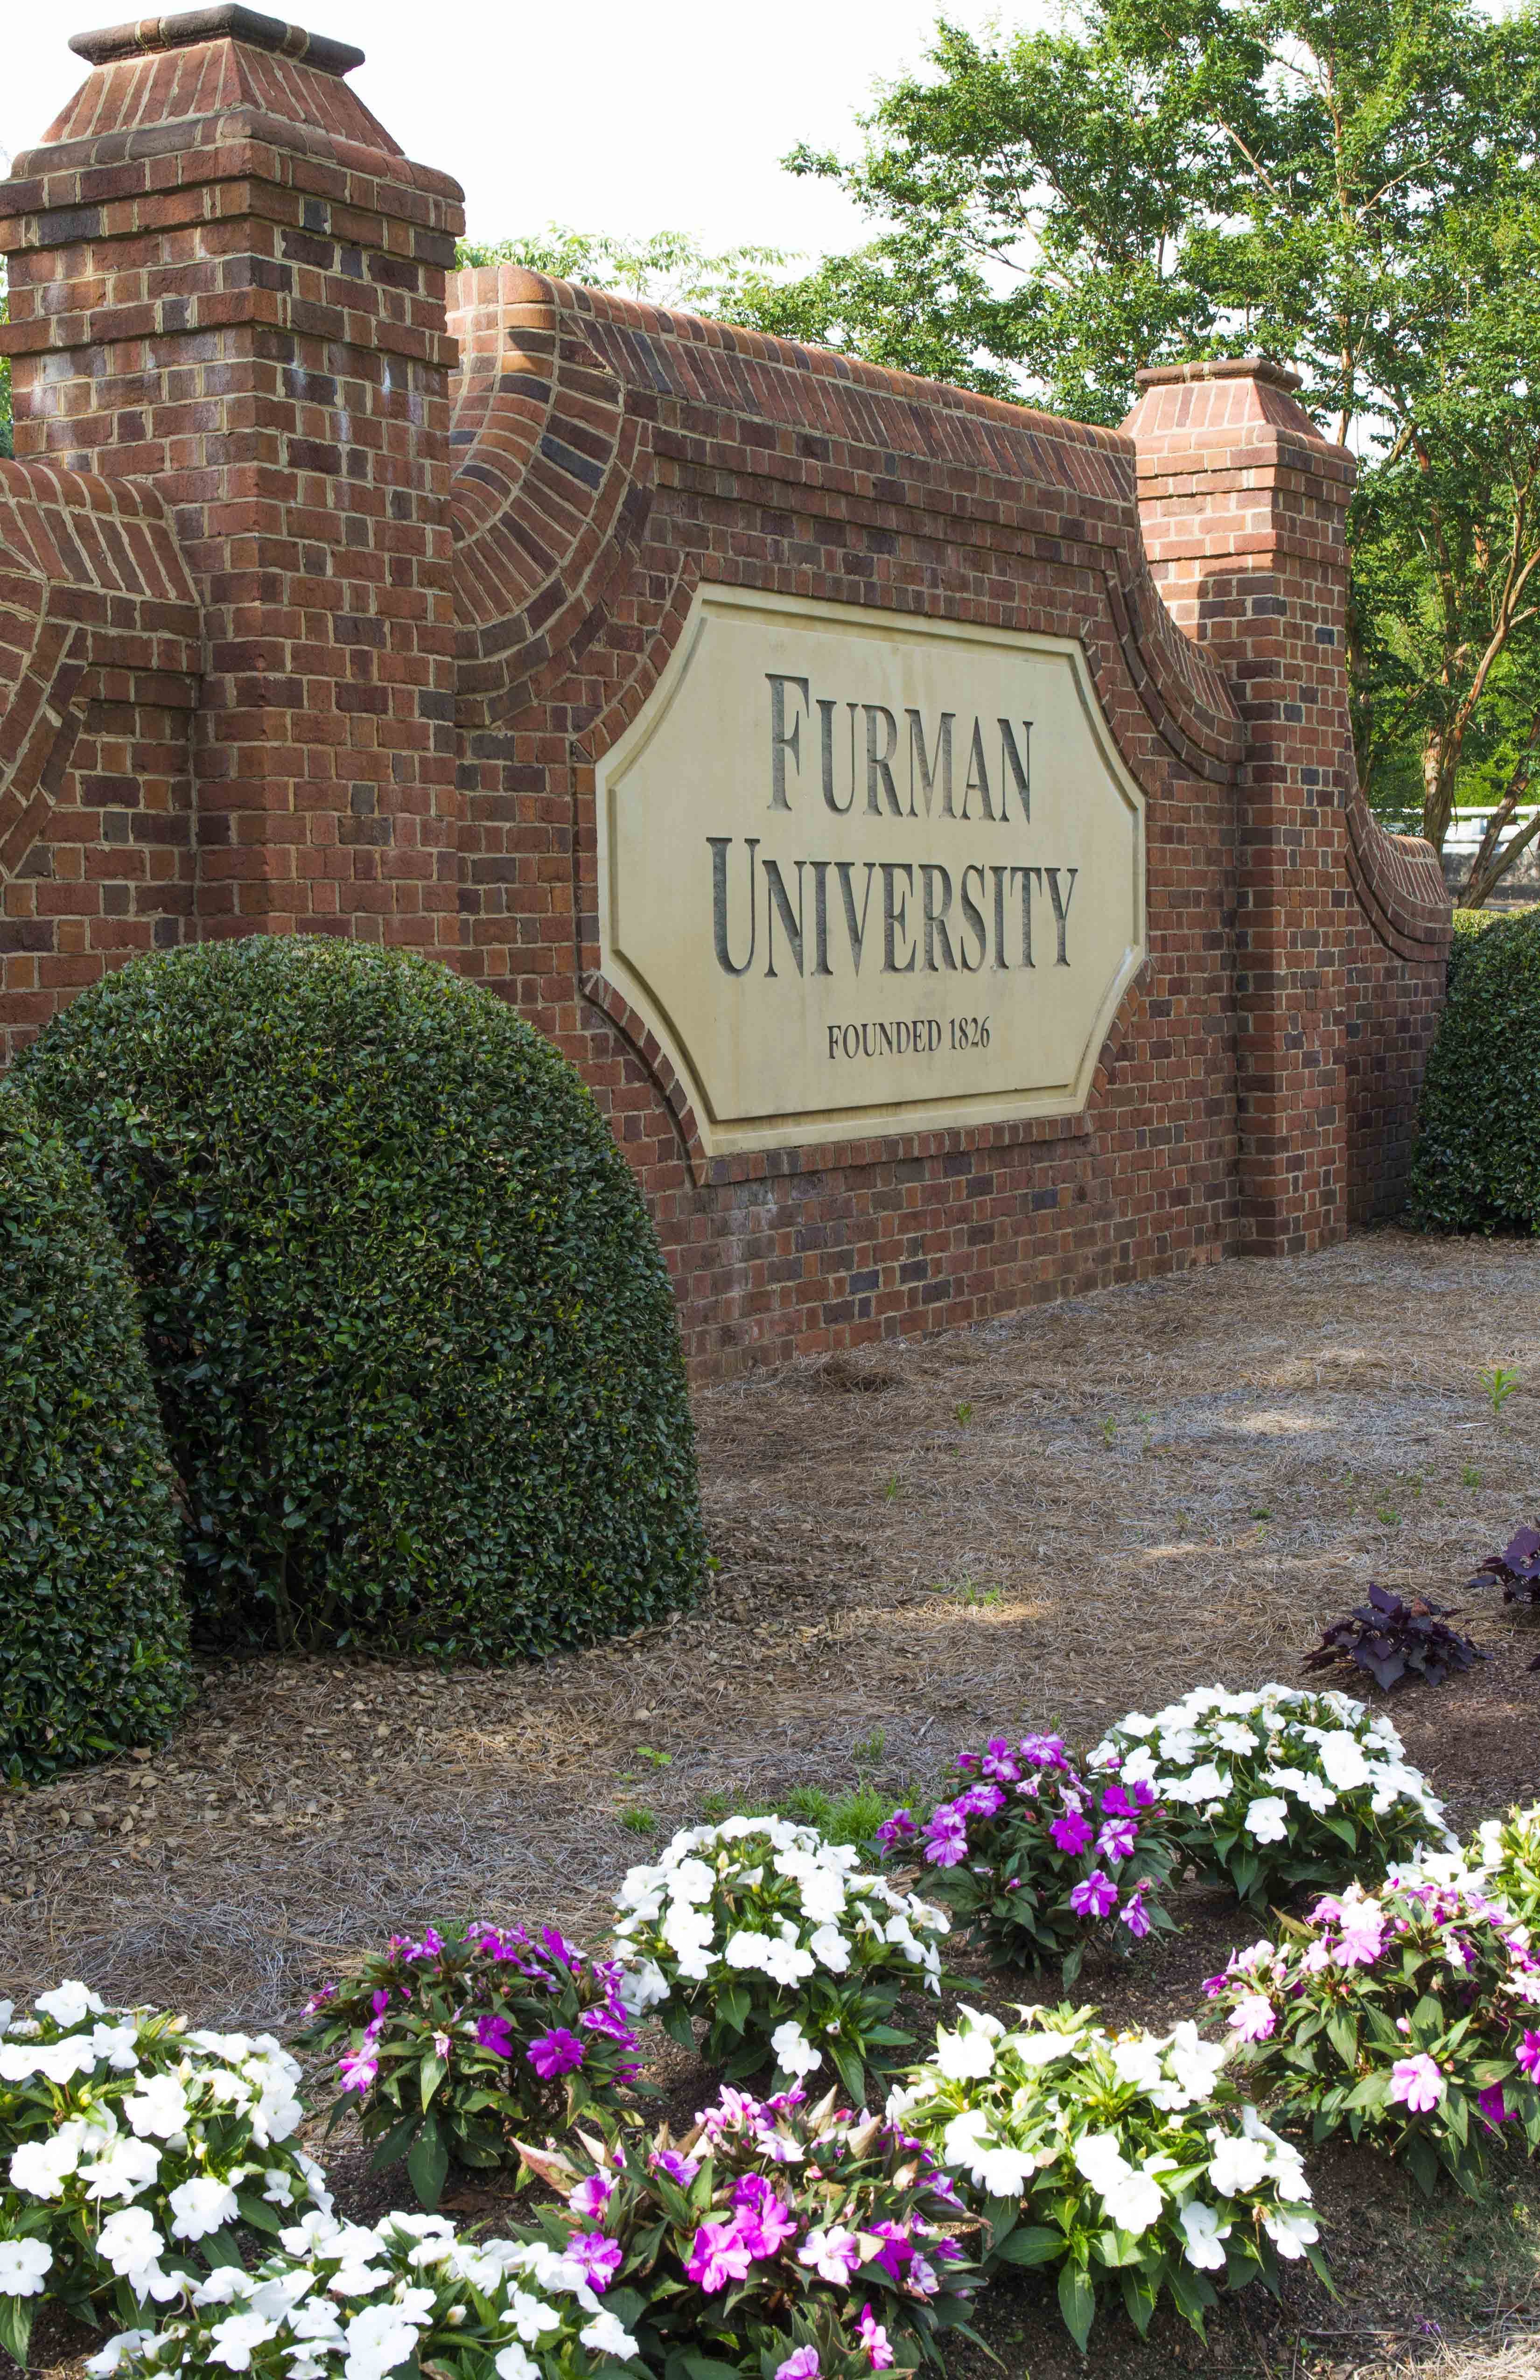 Mark LeFever, president of the South Carolina Independent Colleges and Universities, Inc., said he anticipates schools like Furman University, which is in the SCICU's network, may have to evaluate tuition prices because of the new overtime rule. (Photo: Bill Bachmann/Photoshot/Newscom)